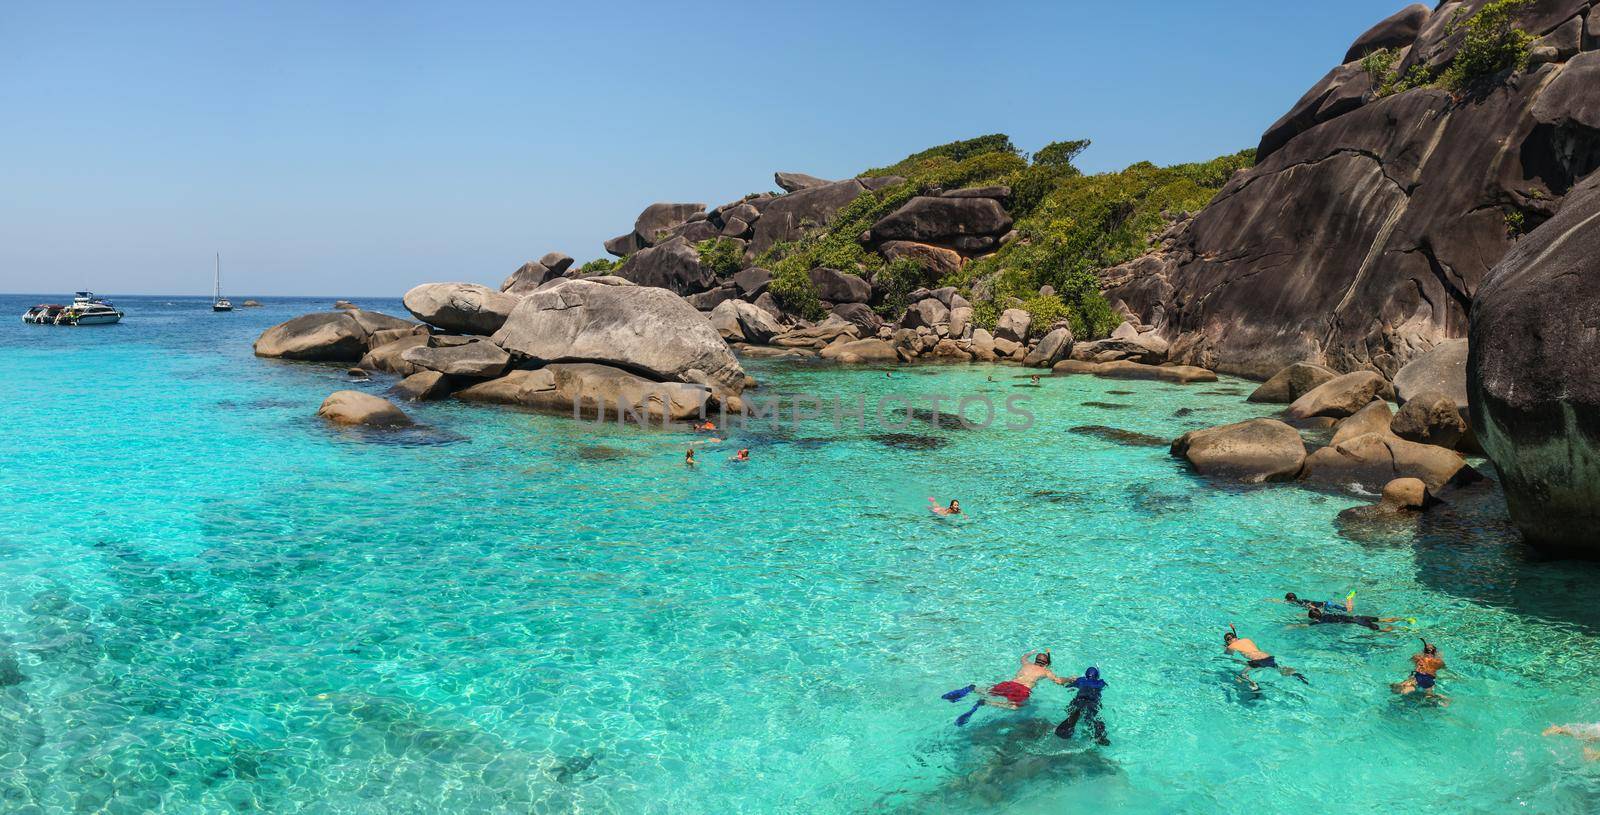 Similan Islands, Thailand - February 23, 2016:  Tourists snorkeling, swimming and enjoying crystal clear water in Similan Islands during guided tour on a sunny day. by Ivanko